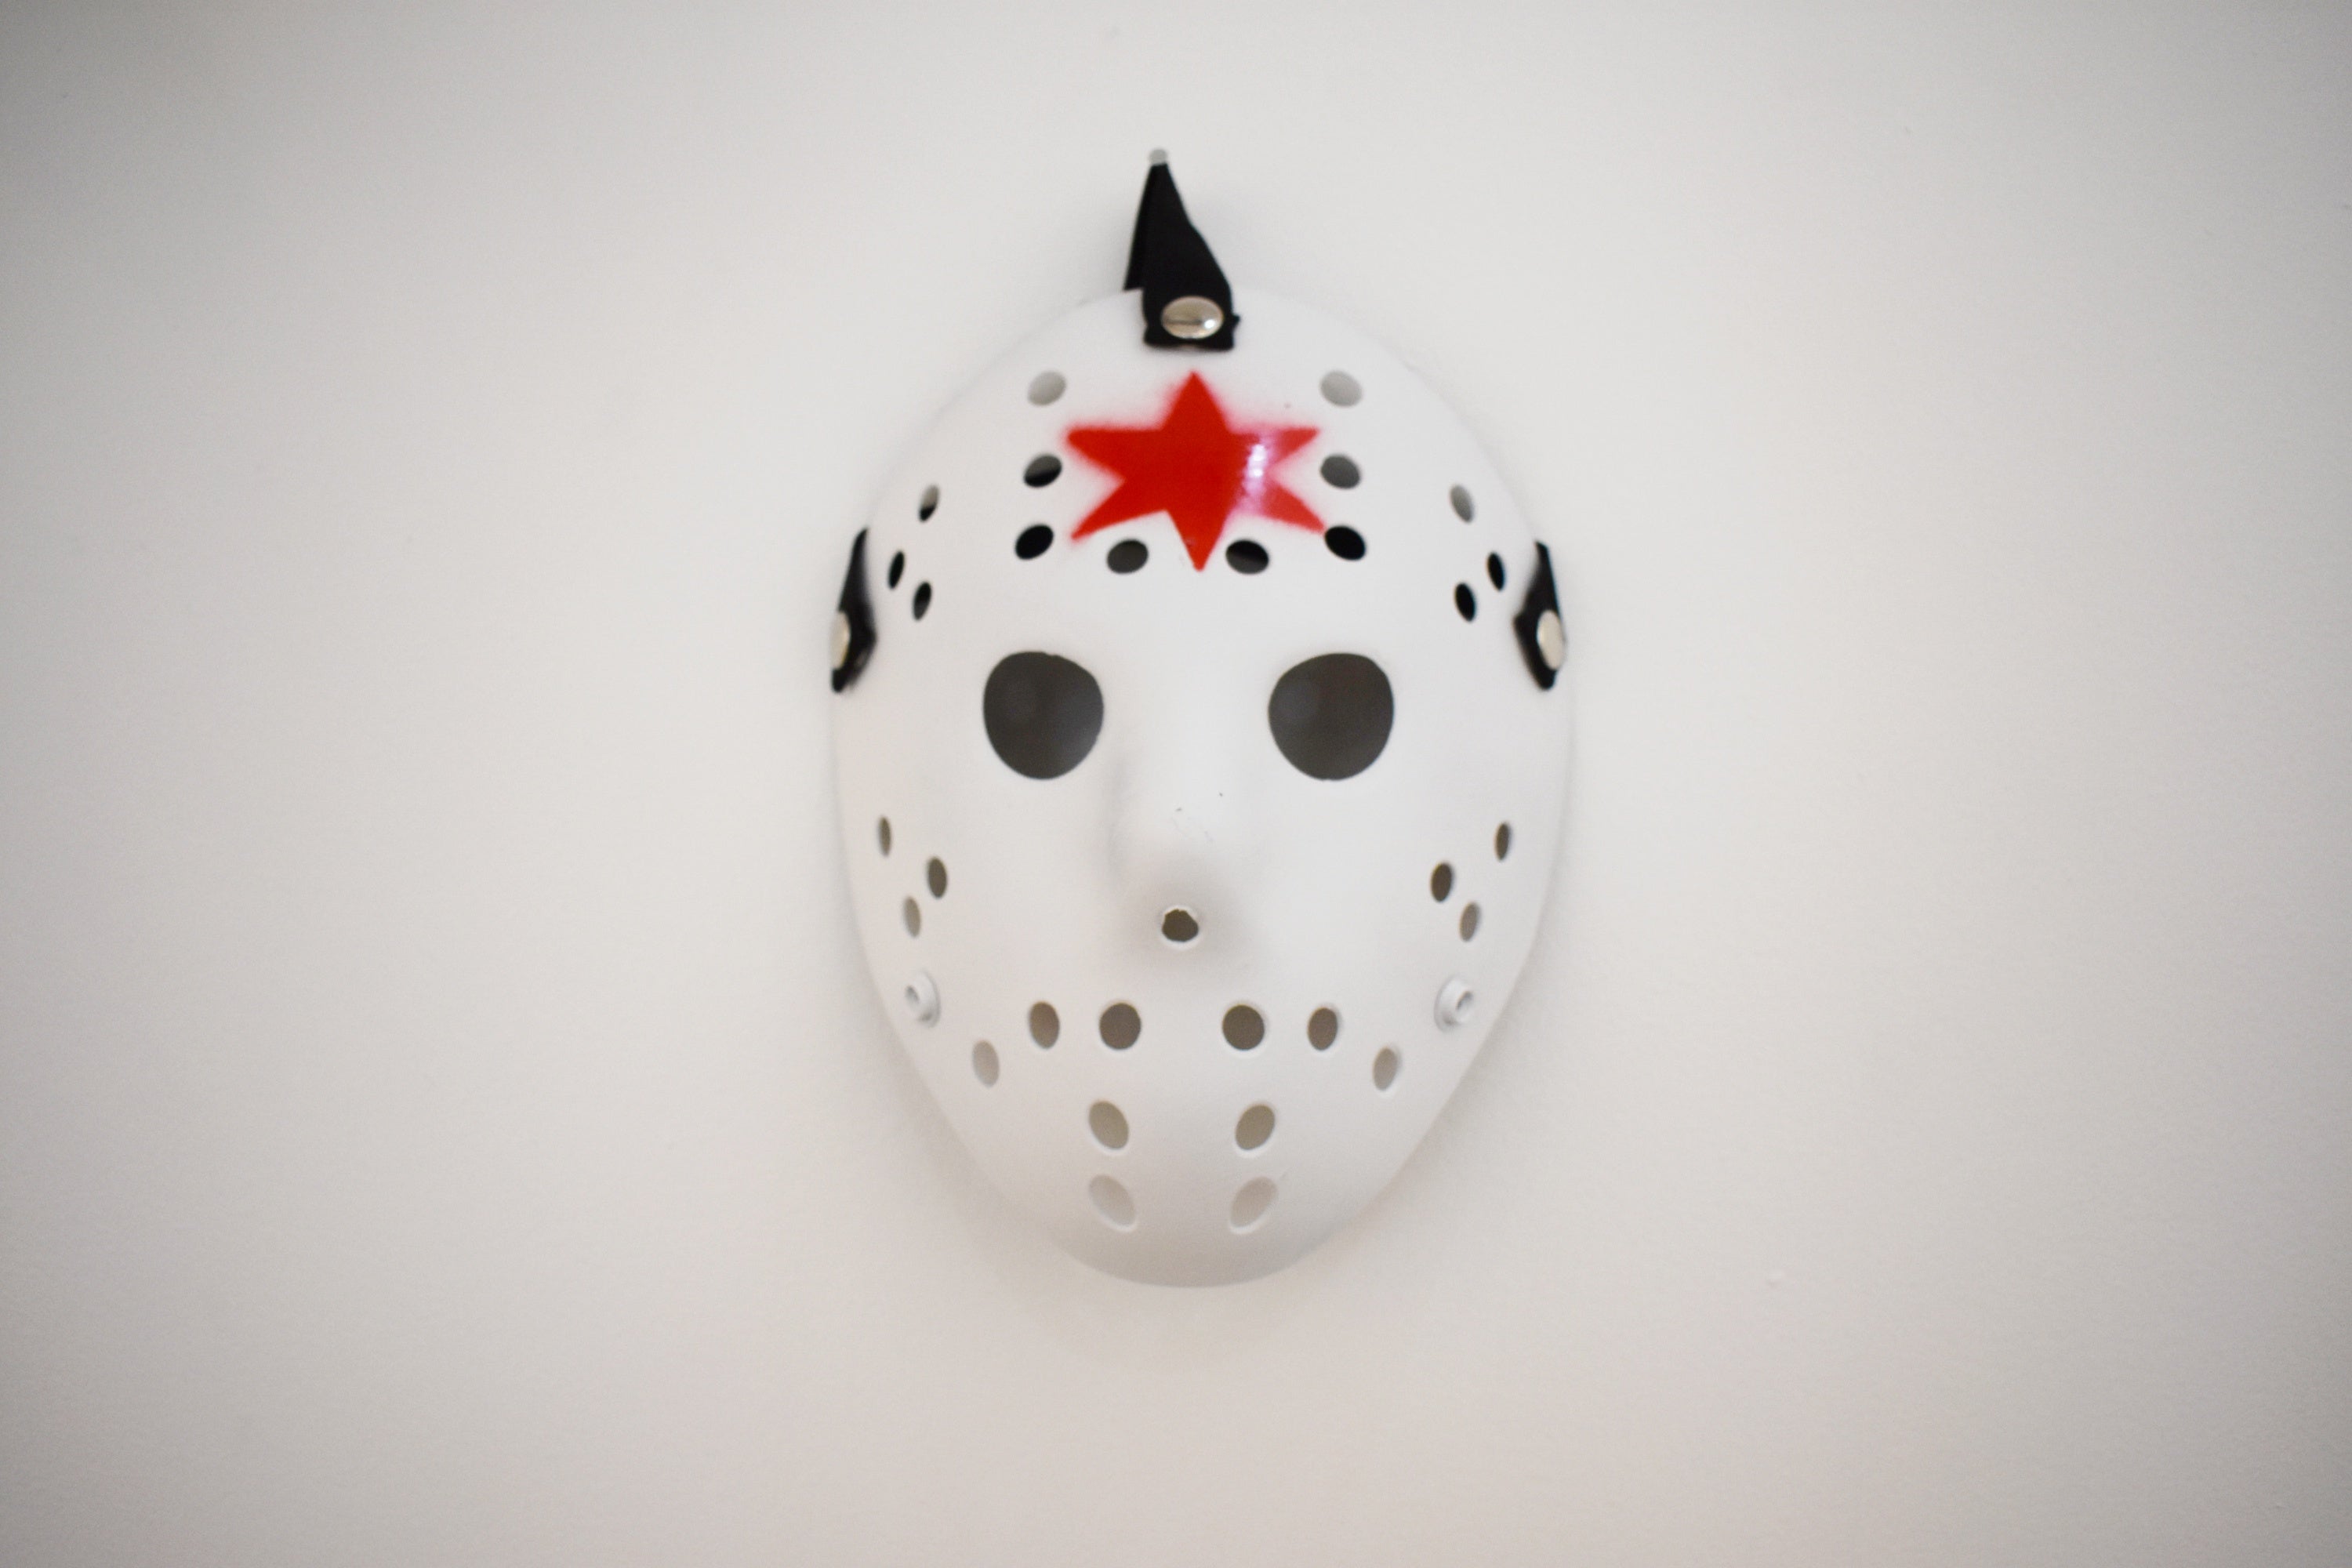 "Jason Voorhees Chicago Mask White" by Steven Holliday